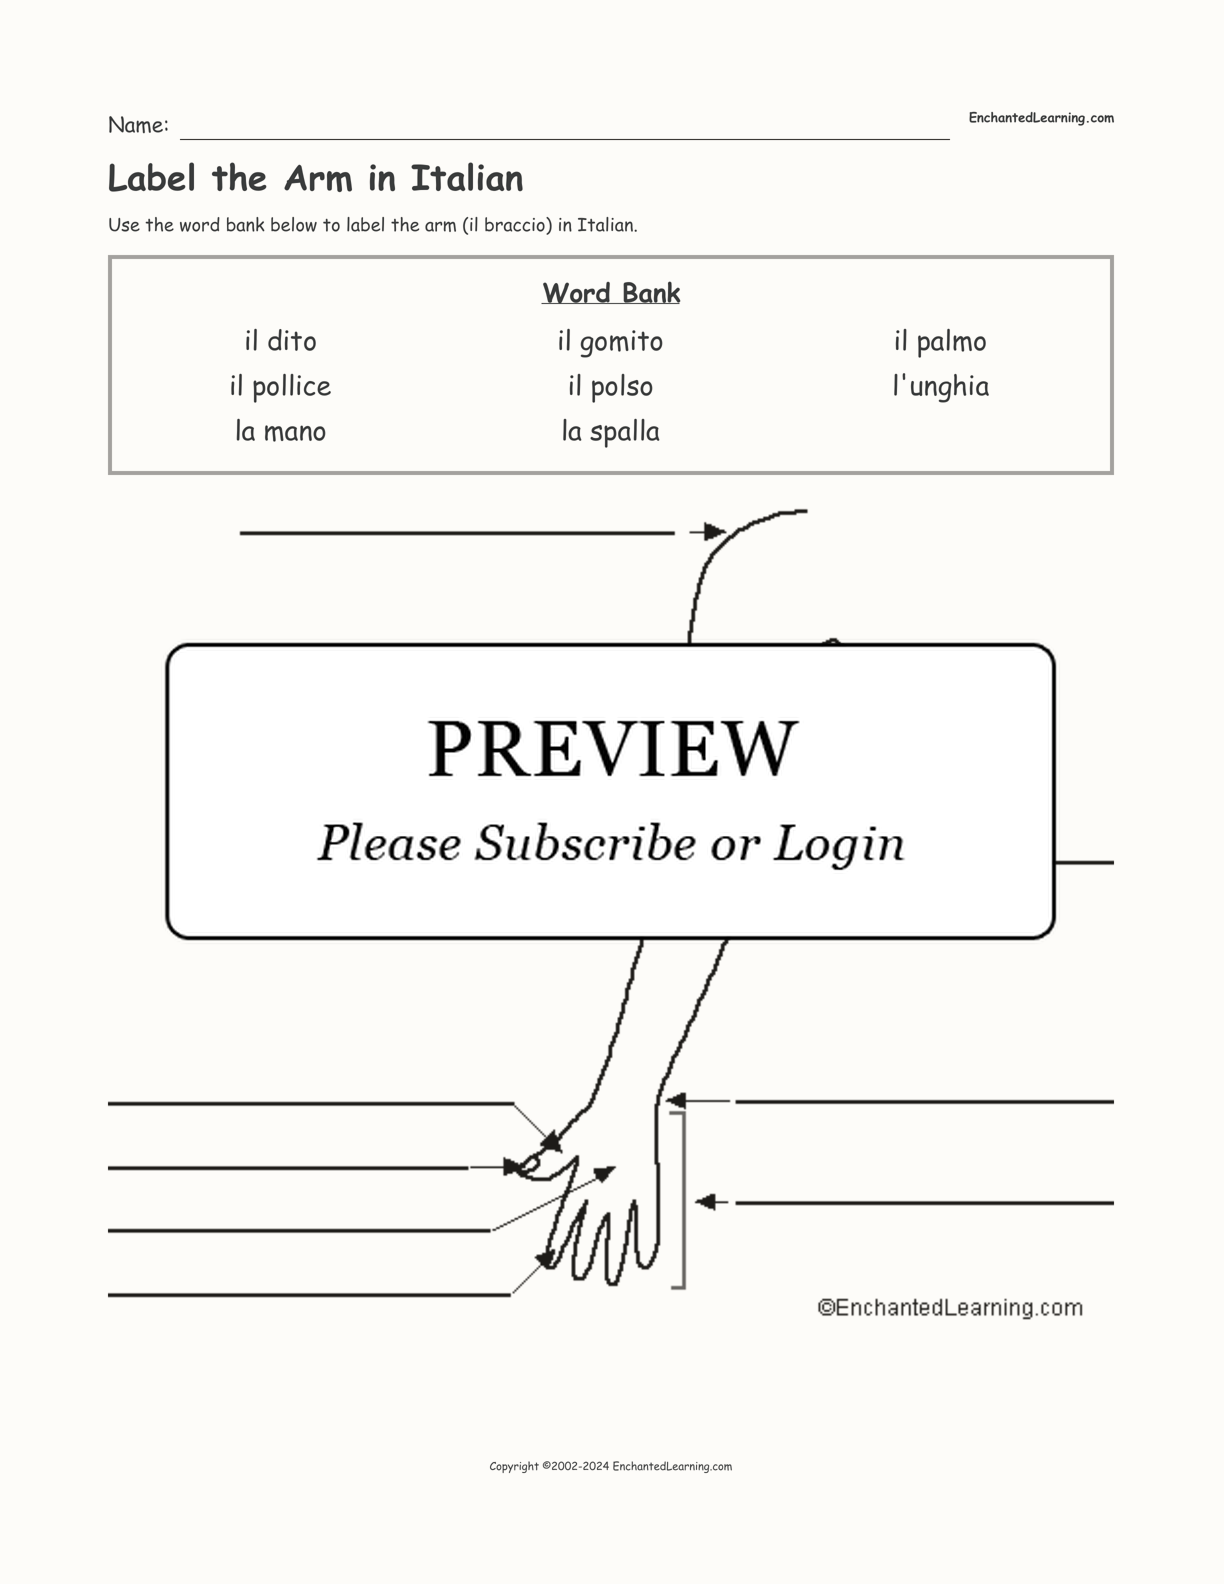 Label the Arm in Italian interactive worksheet page 1